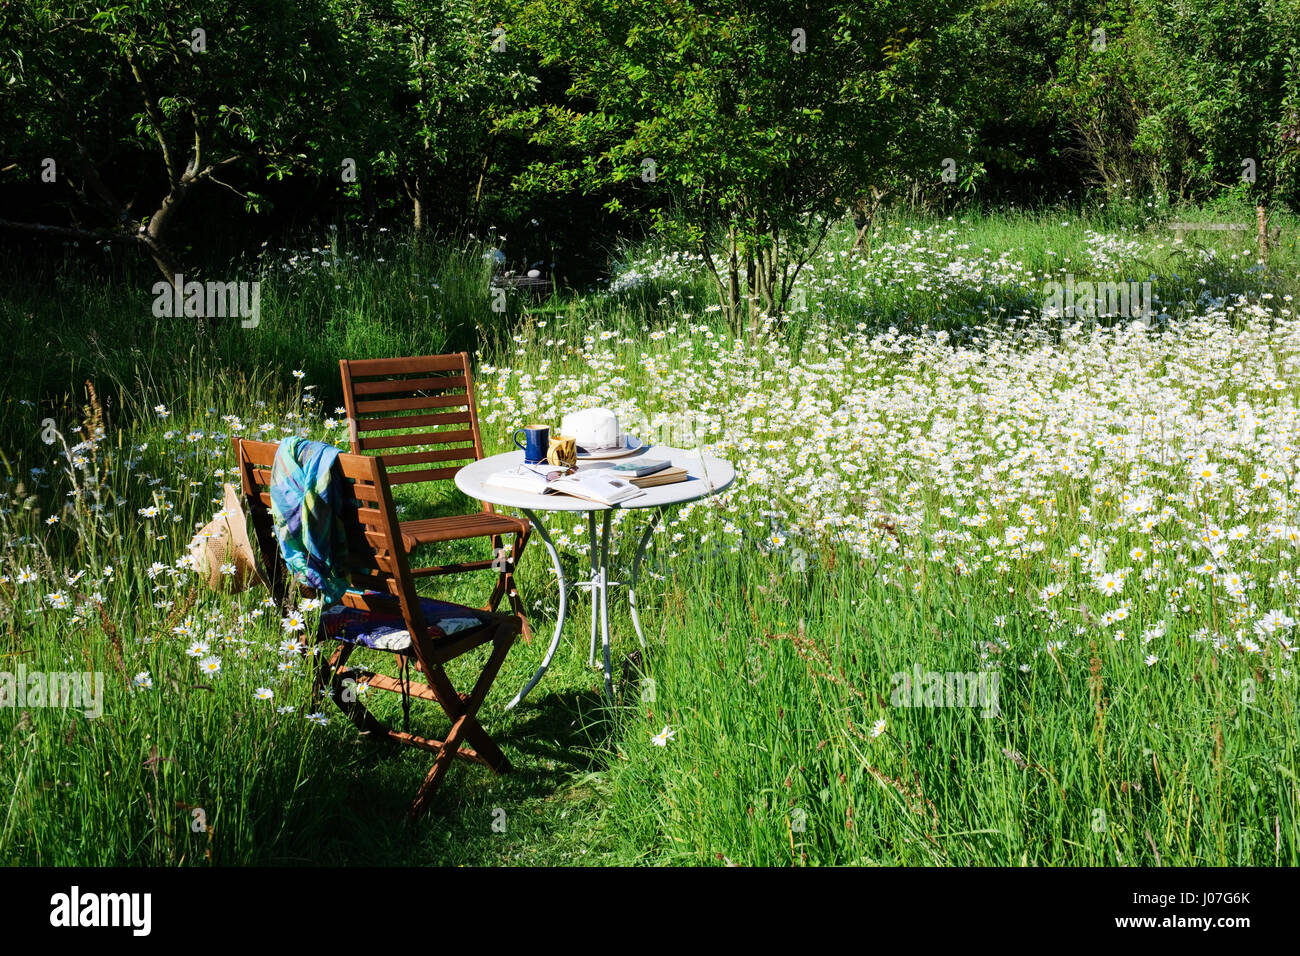 Two chairs and a table with books, mugs and sun hats, in a wildflower meadow on a hot sunny afternoon. Oxe eye daisies Stock Photo